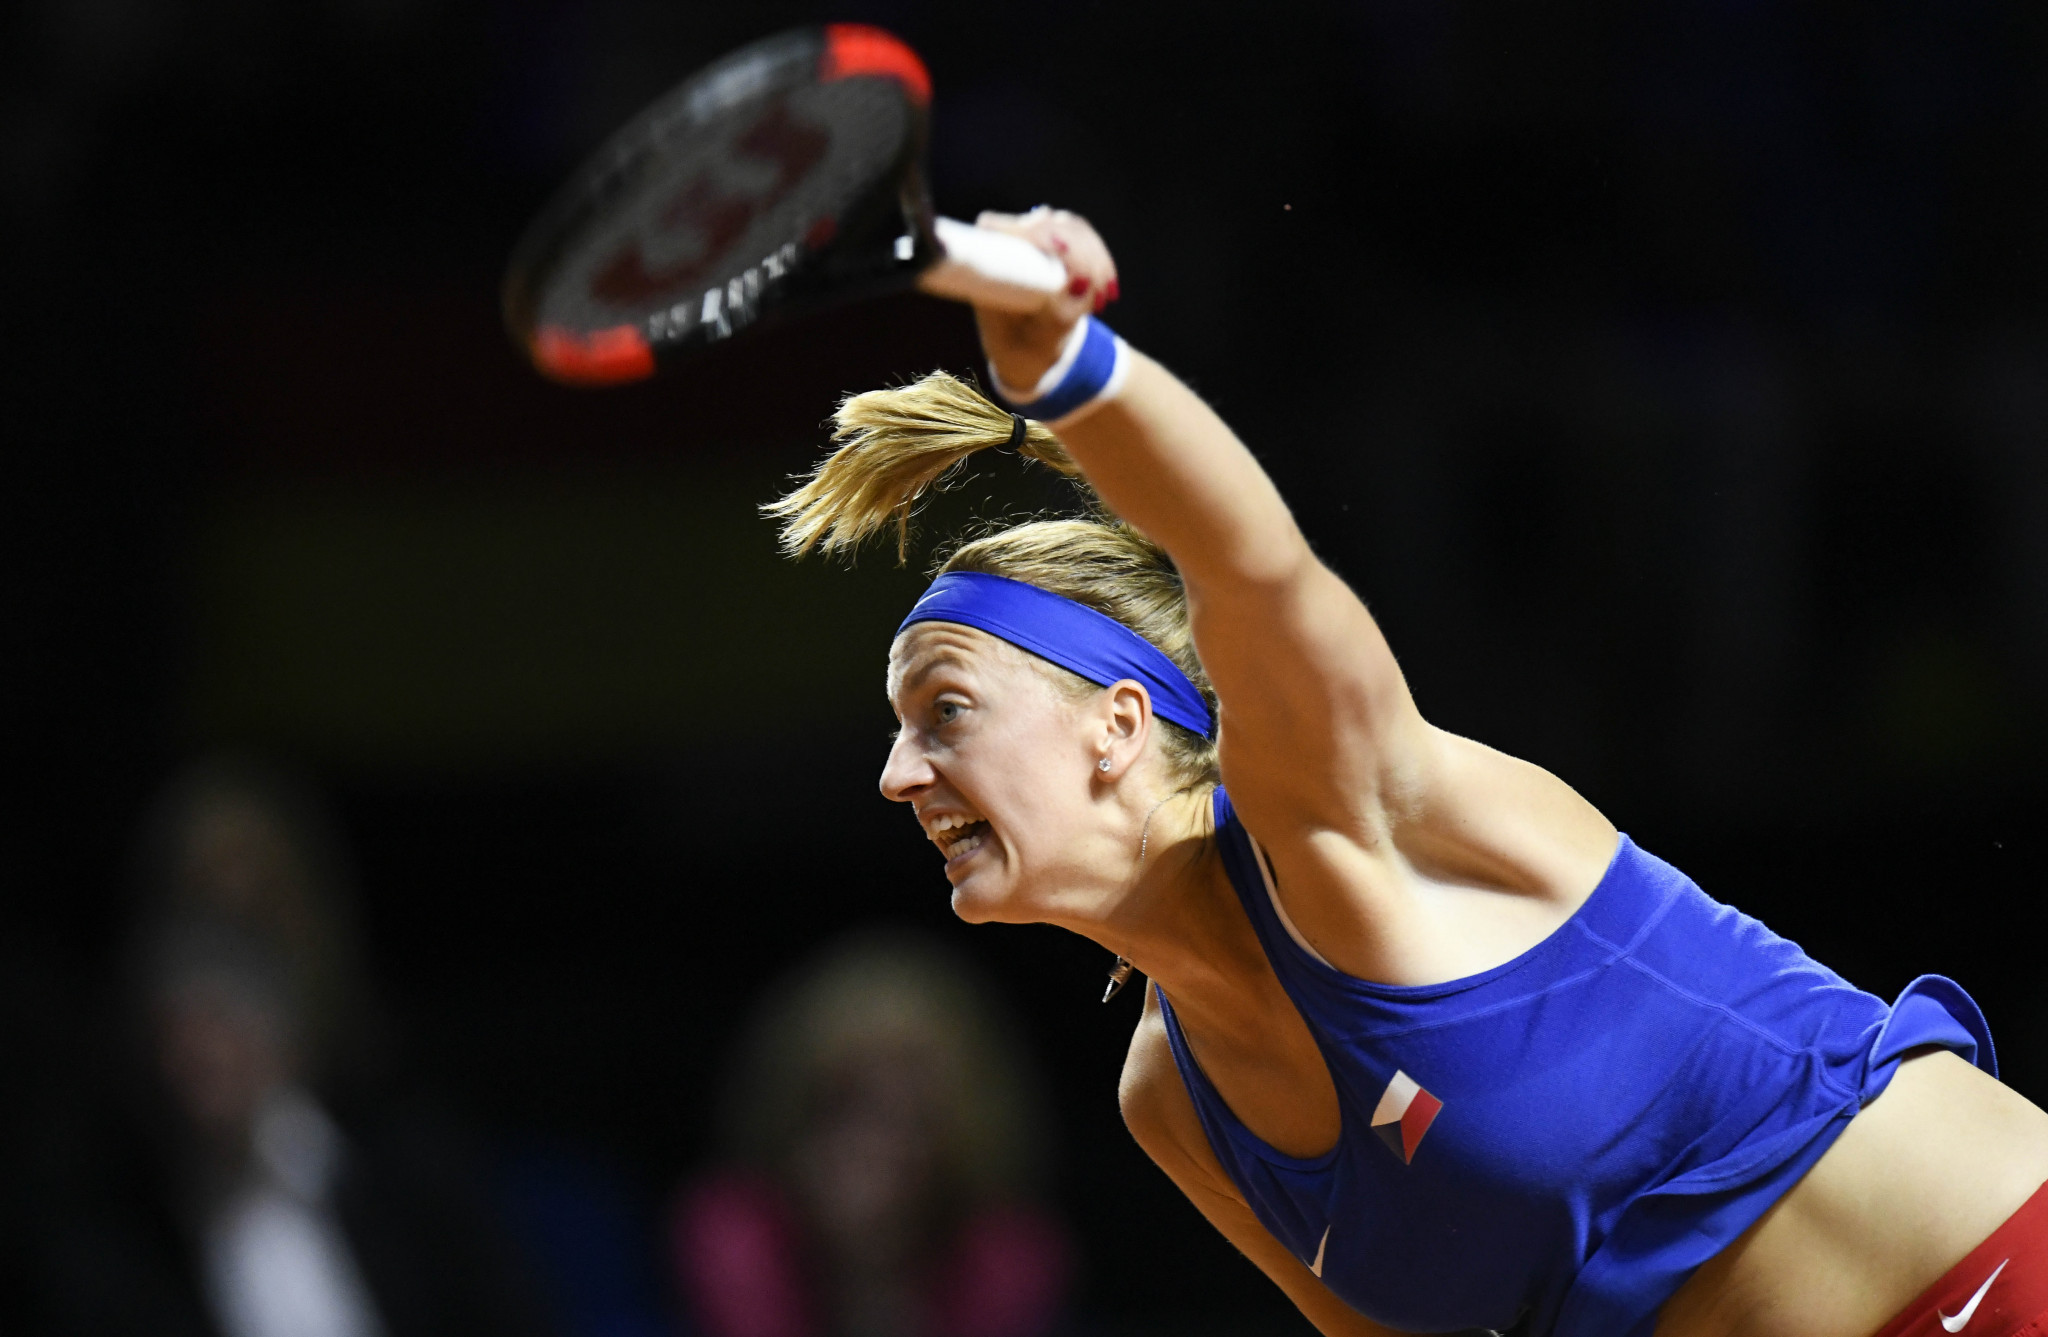 Petra Kvitová sealed the Czech Republic's place in the final with a crushing win over Angelique Kerber ©Getty Images